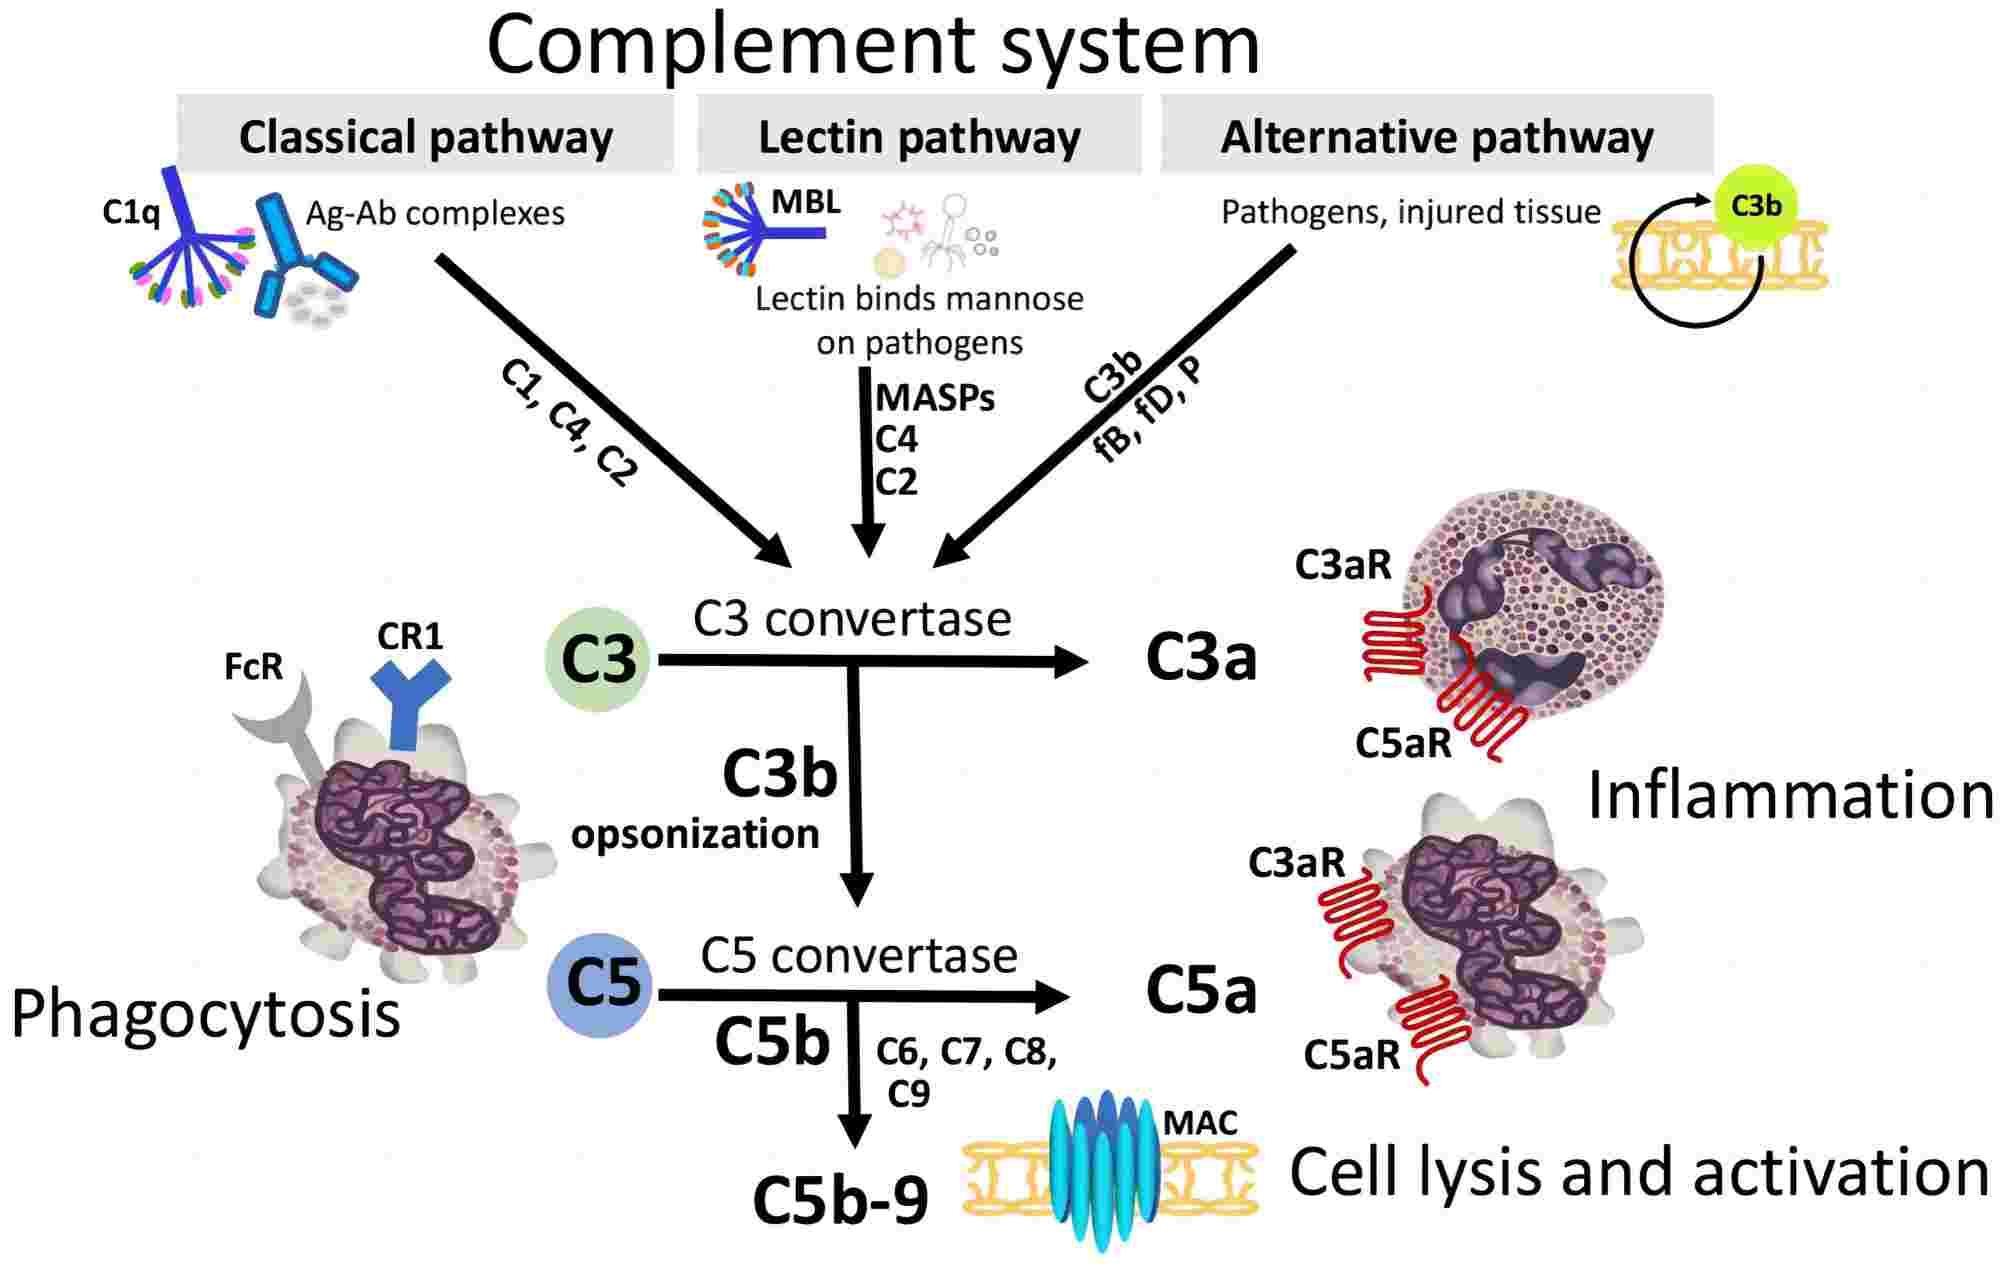 Fig. 2 Complement activation by the classical pathway (CP), lectin pathway (LP), and alternative pathway (AP). (Girardi et al., 2020)’